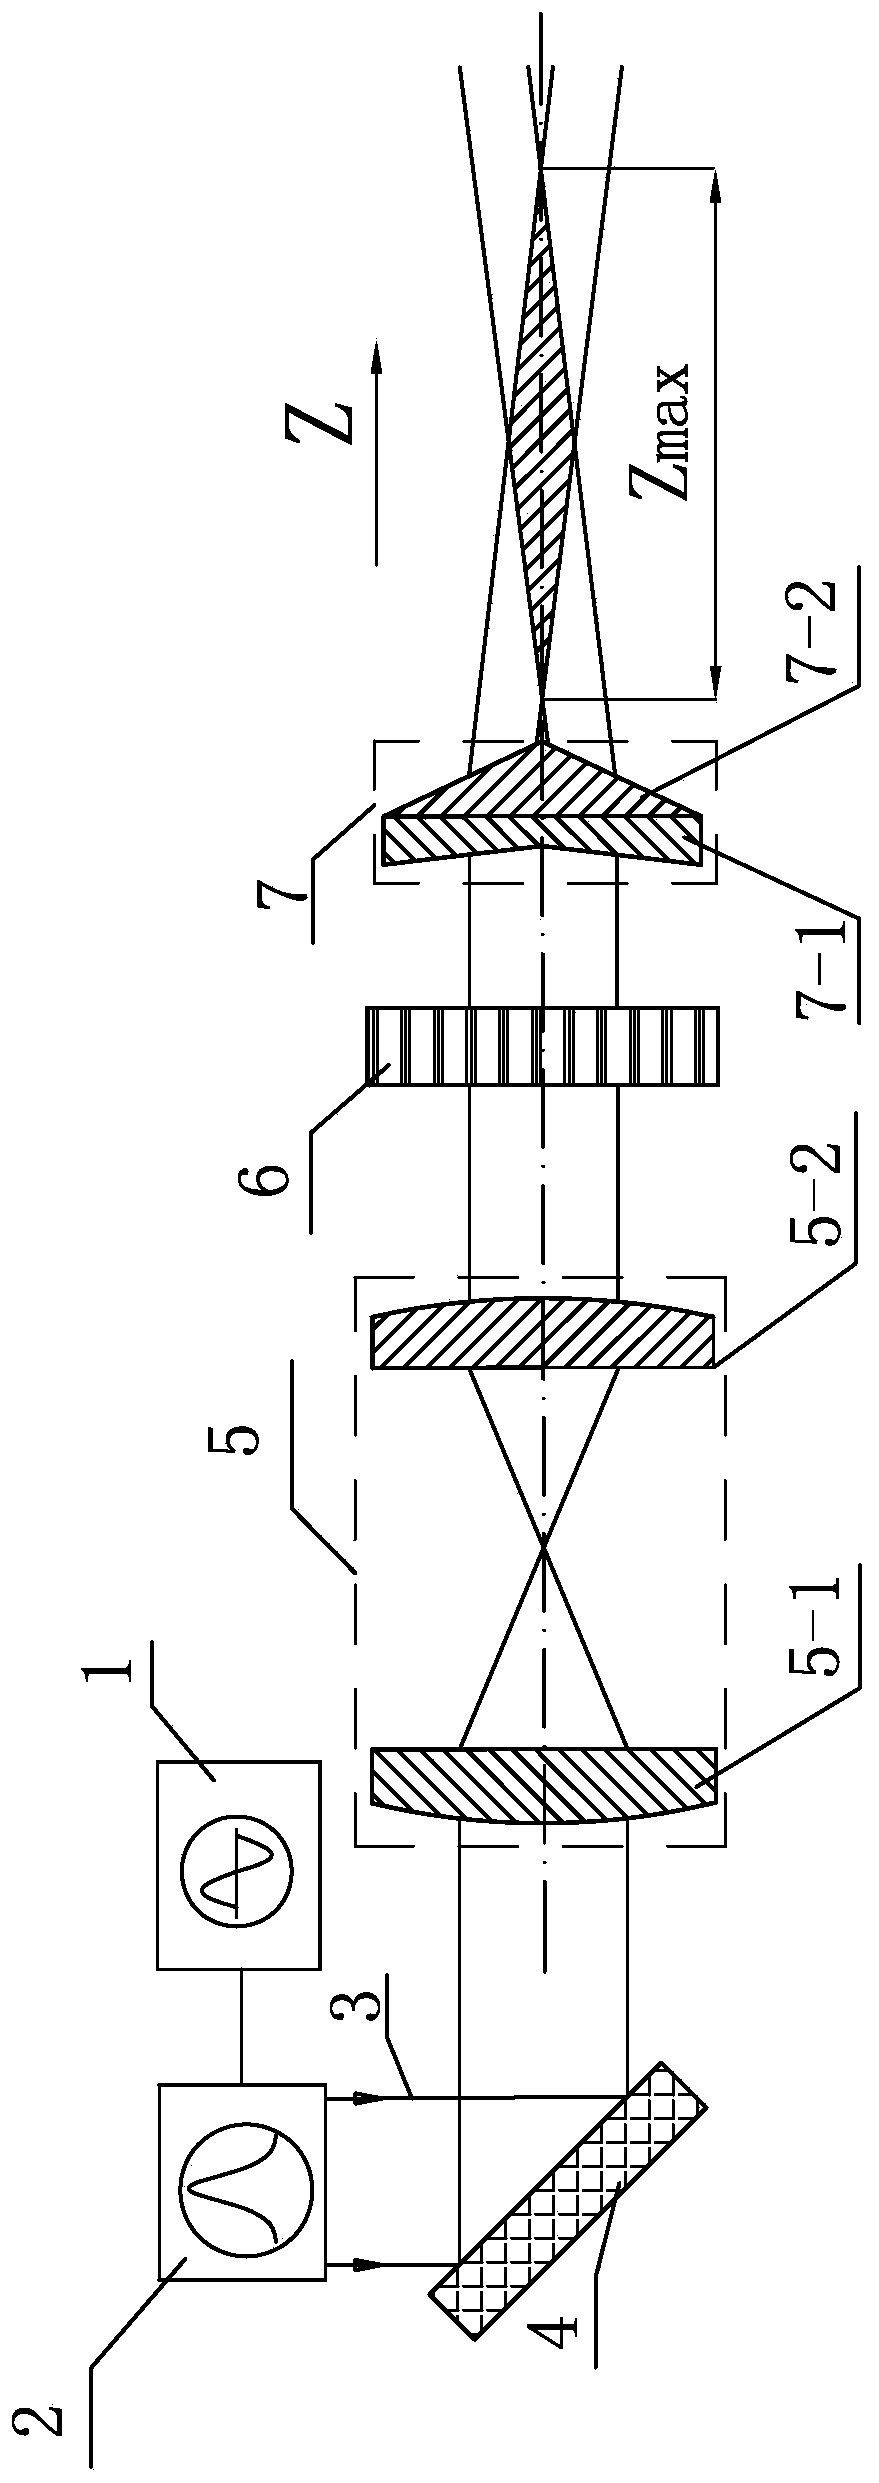 Laser beam focusing method and system for coupled water beam optical fiber